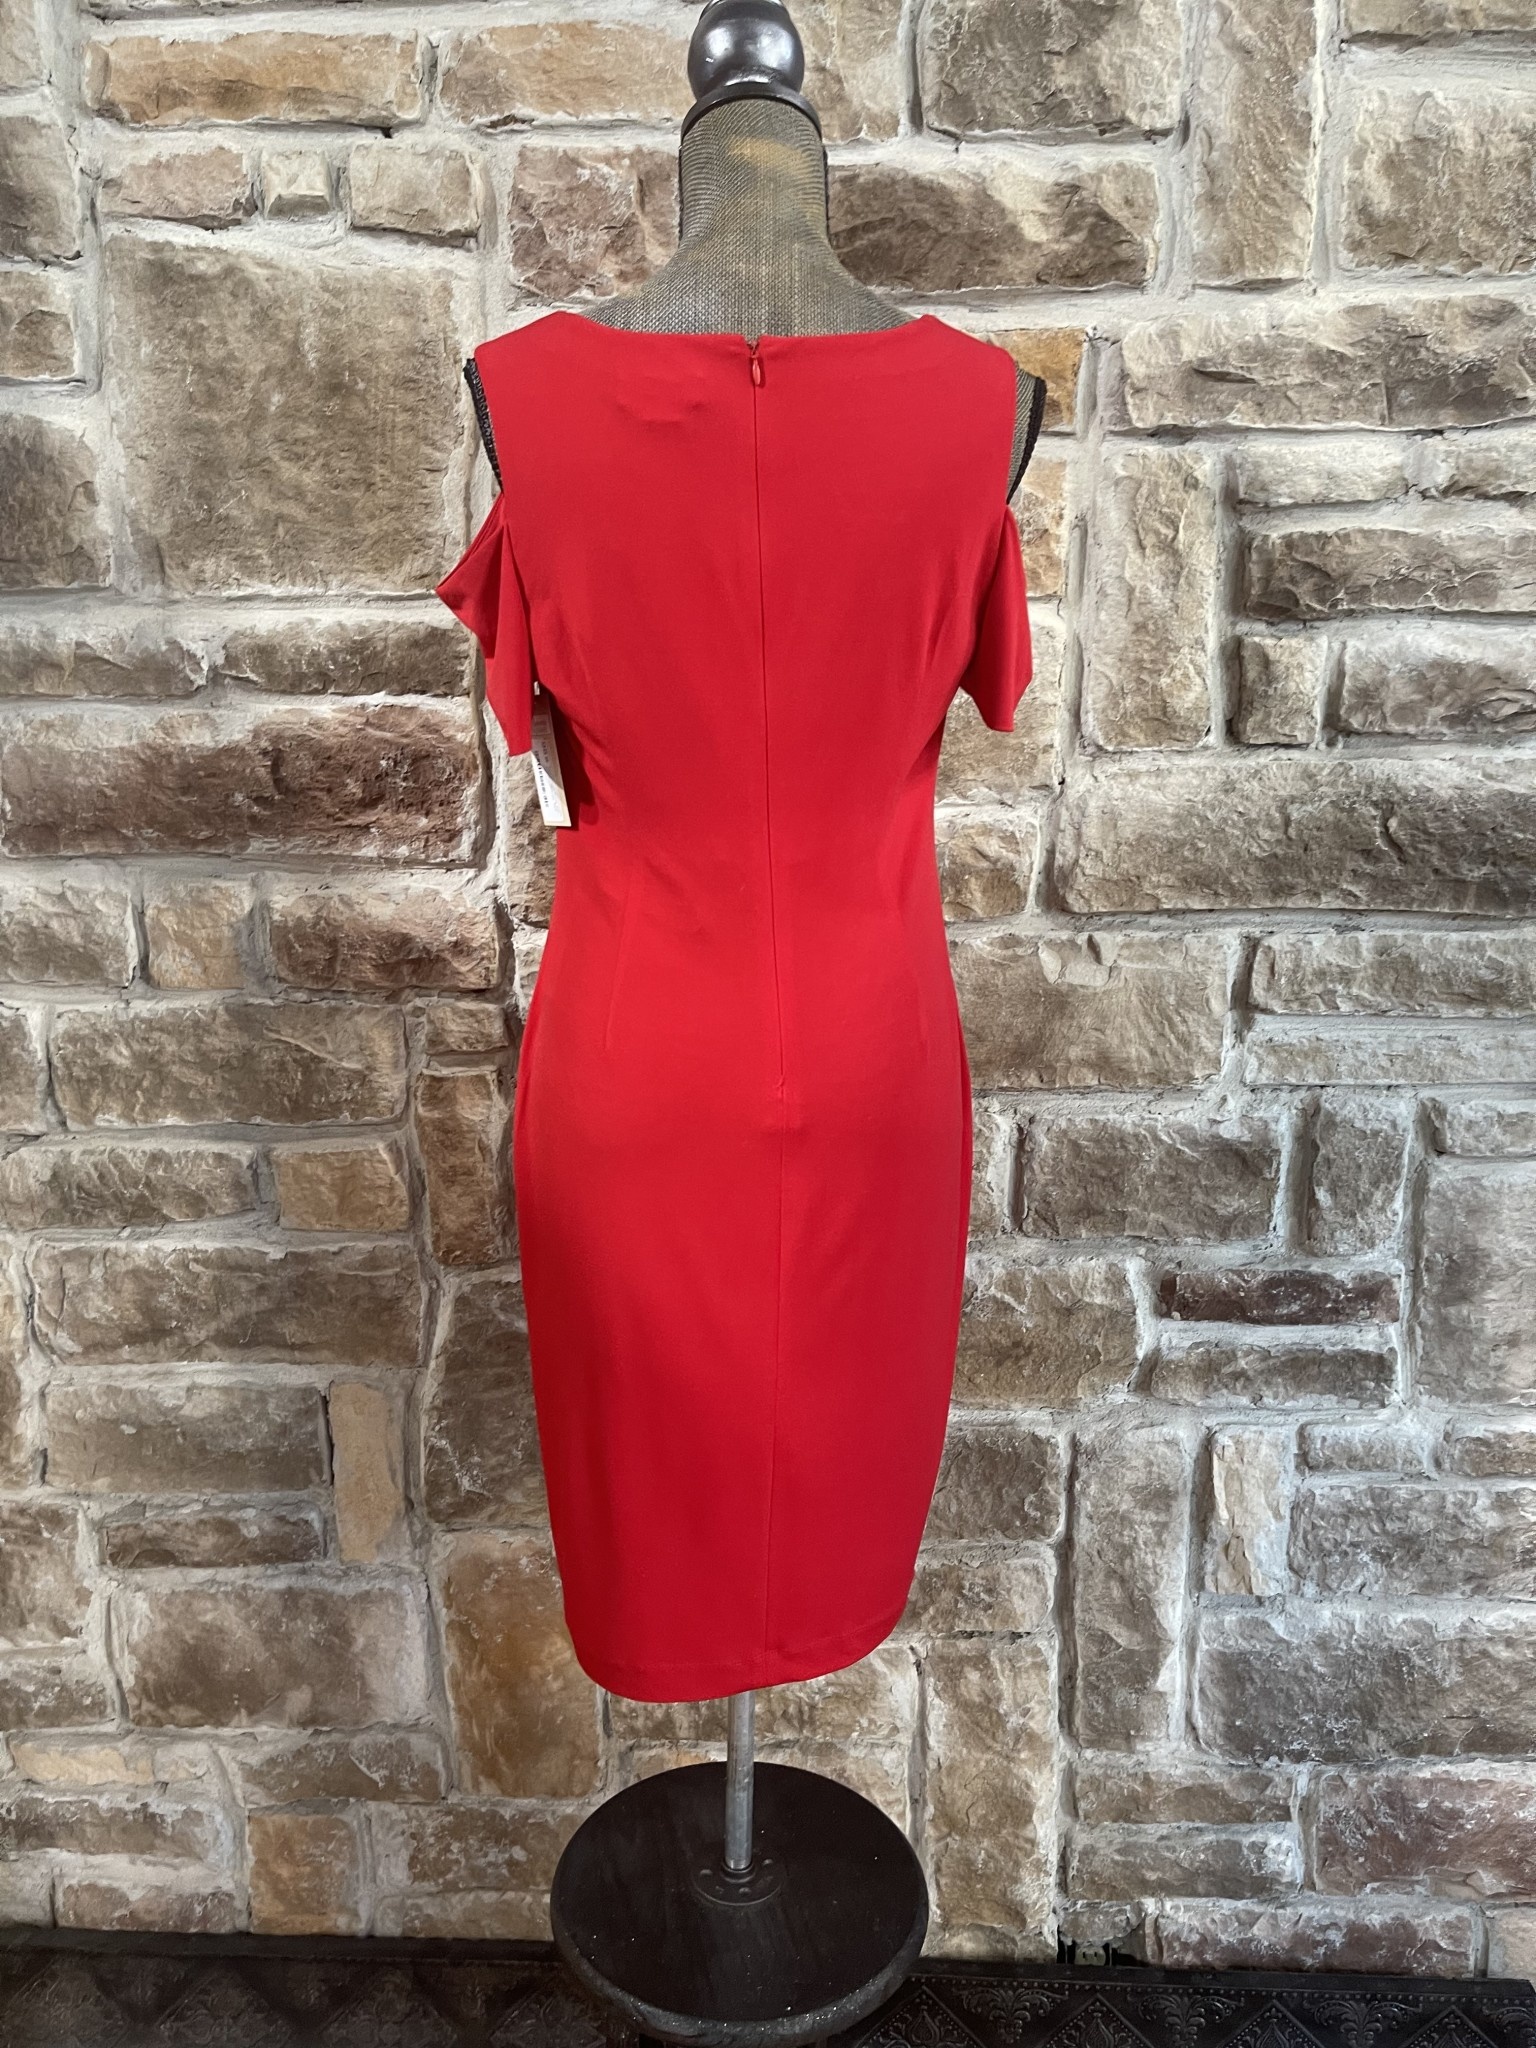 Calvin Klein Red Sheath Dress with Cut Out Sleeves, Size 10 - Elements  Unleashed